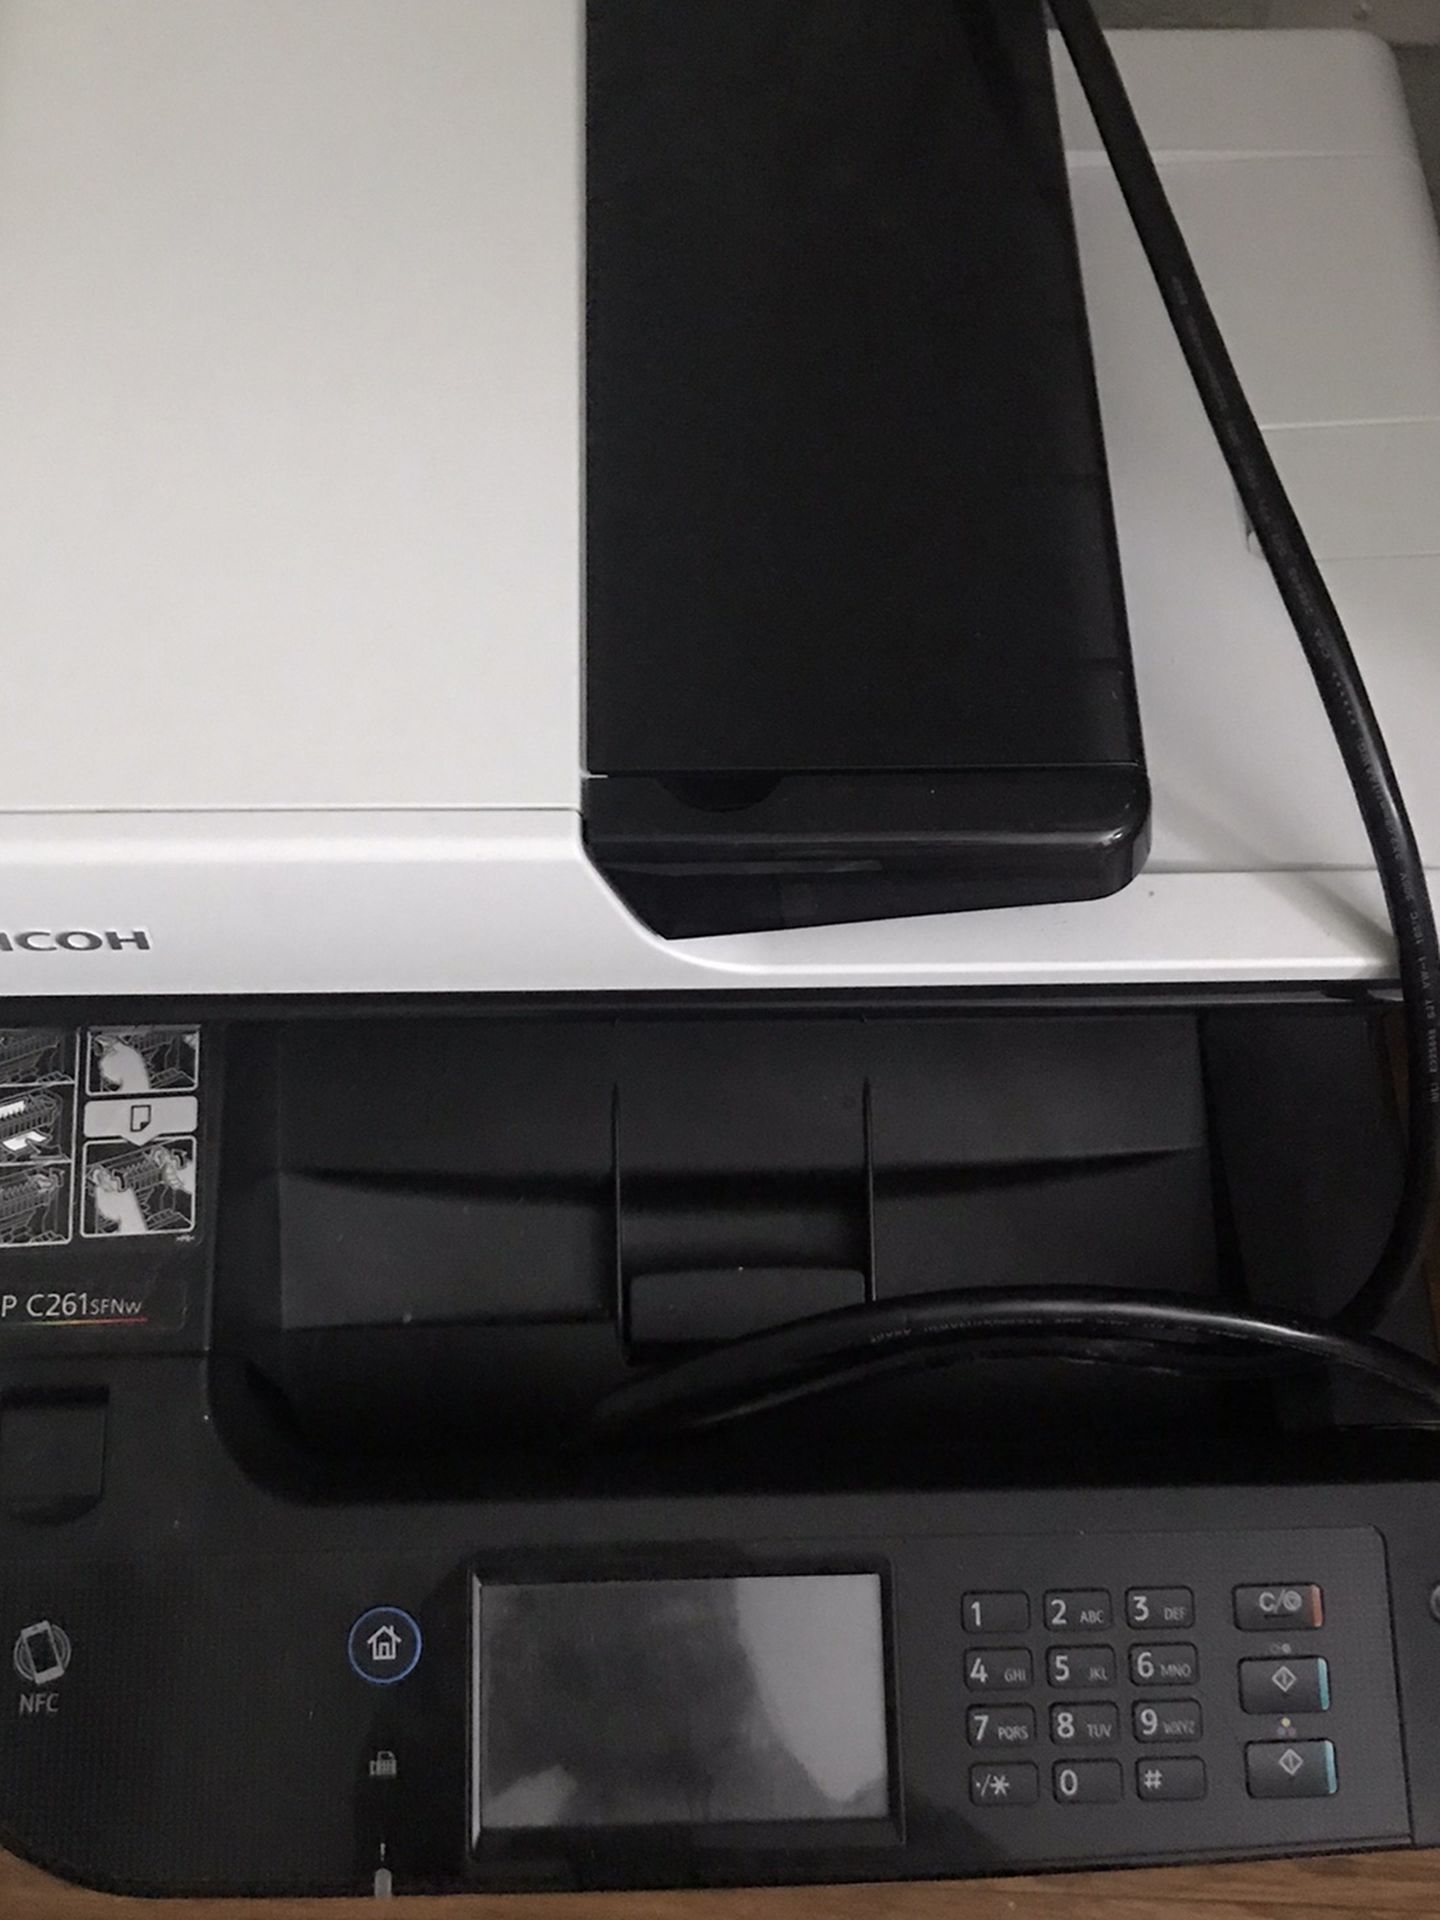 Ricoh SP C261SFNw All-in-One Color Laser Printer With Fax